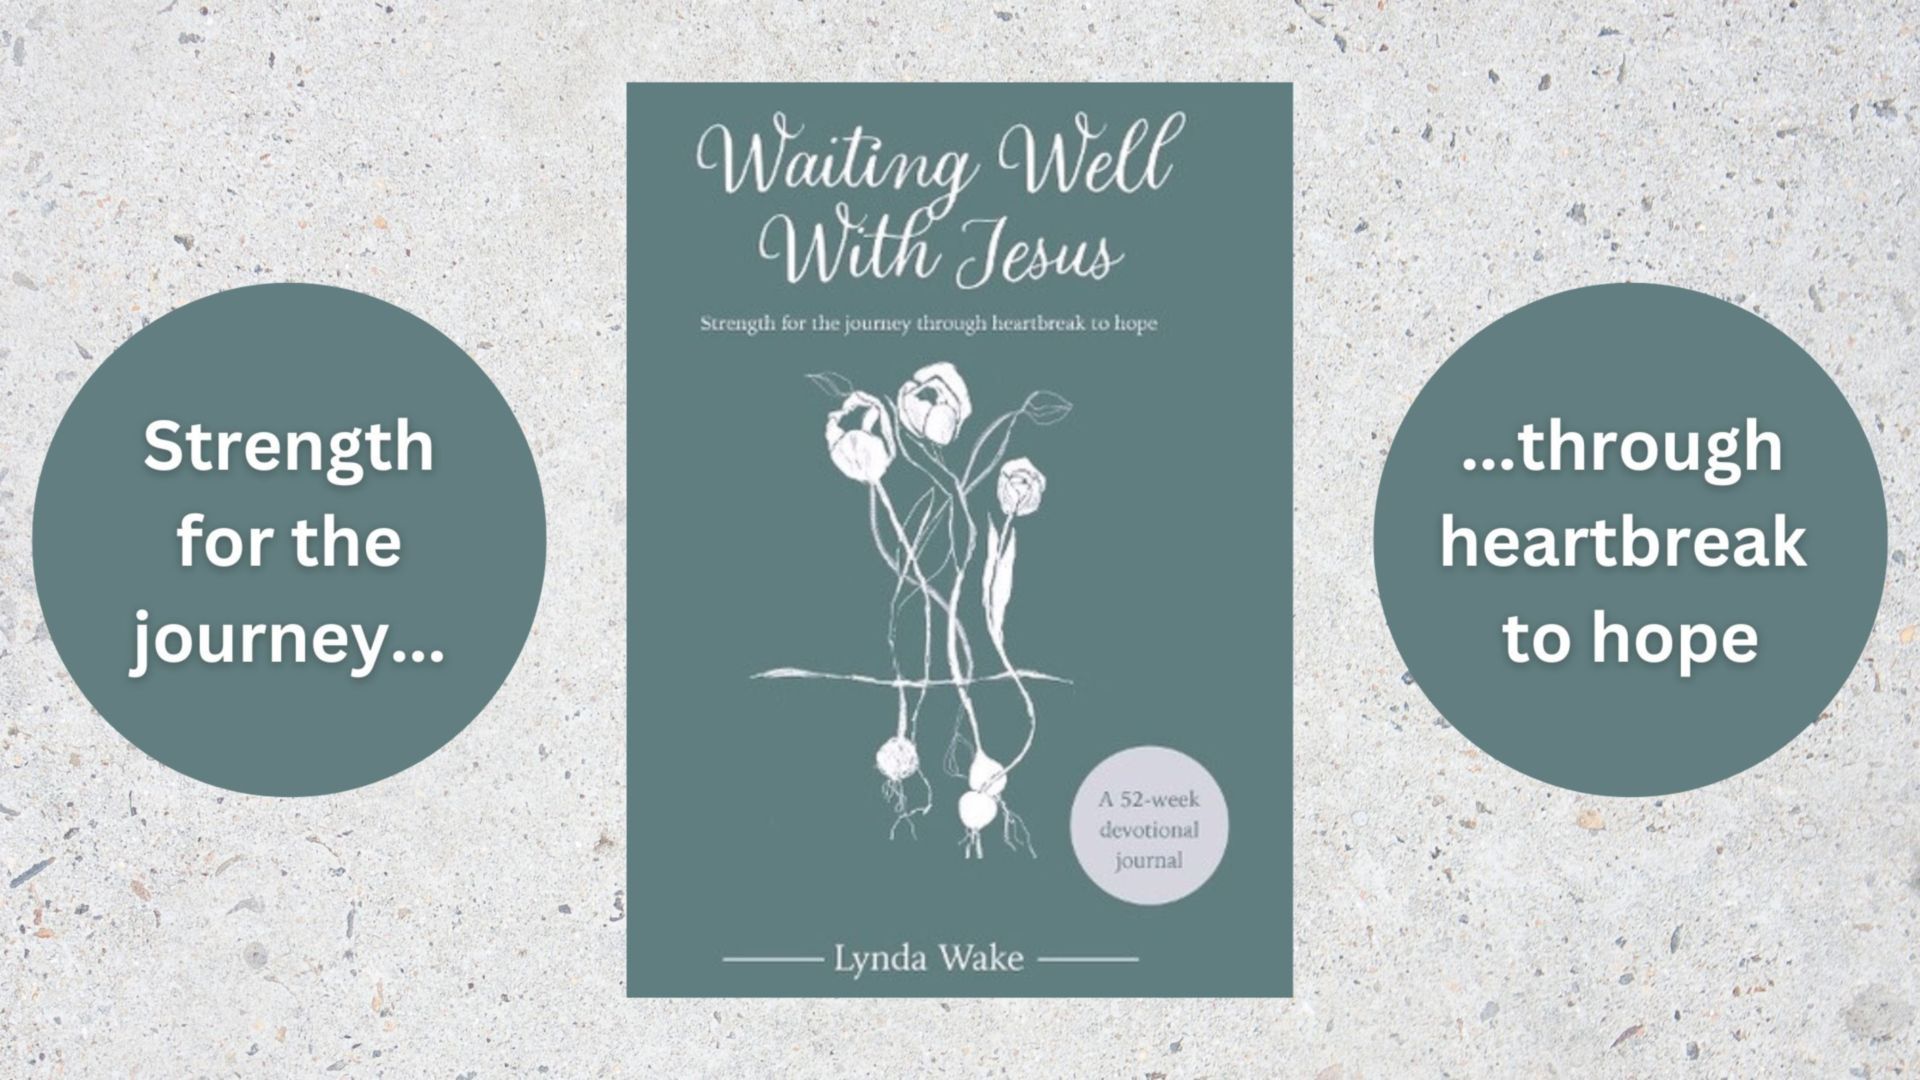 An interview with Lynda Wake, author of 'Waiting Well With Jesus'